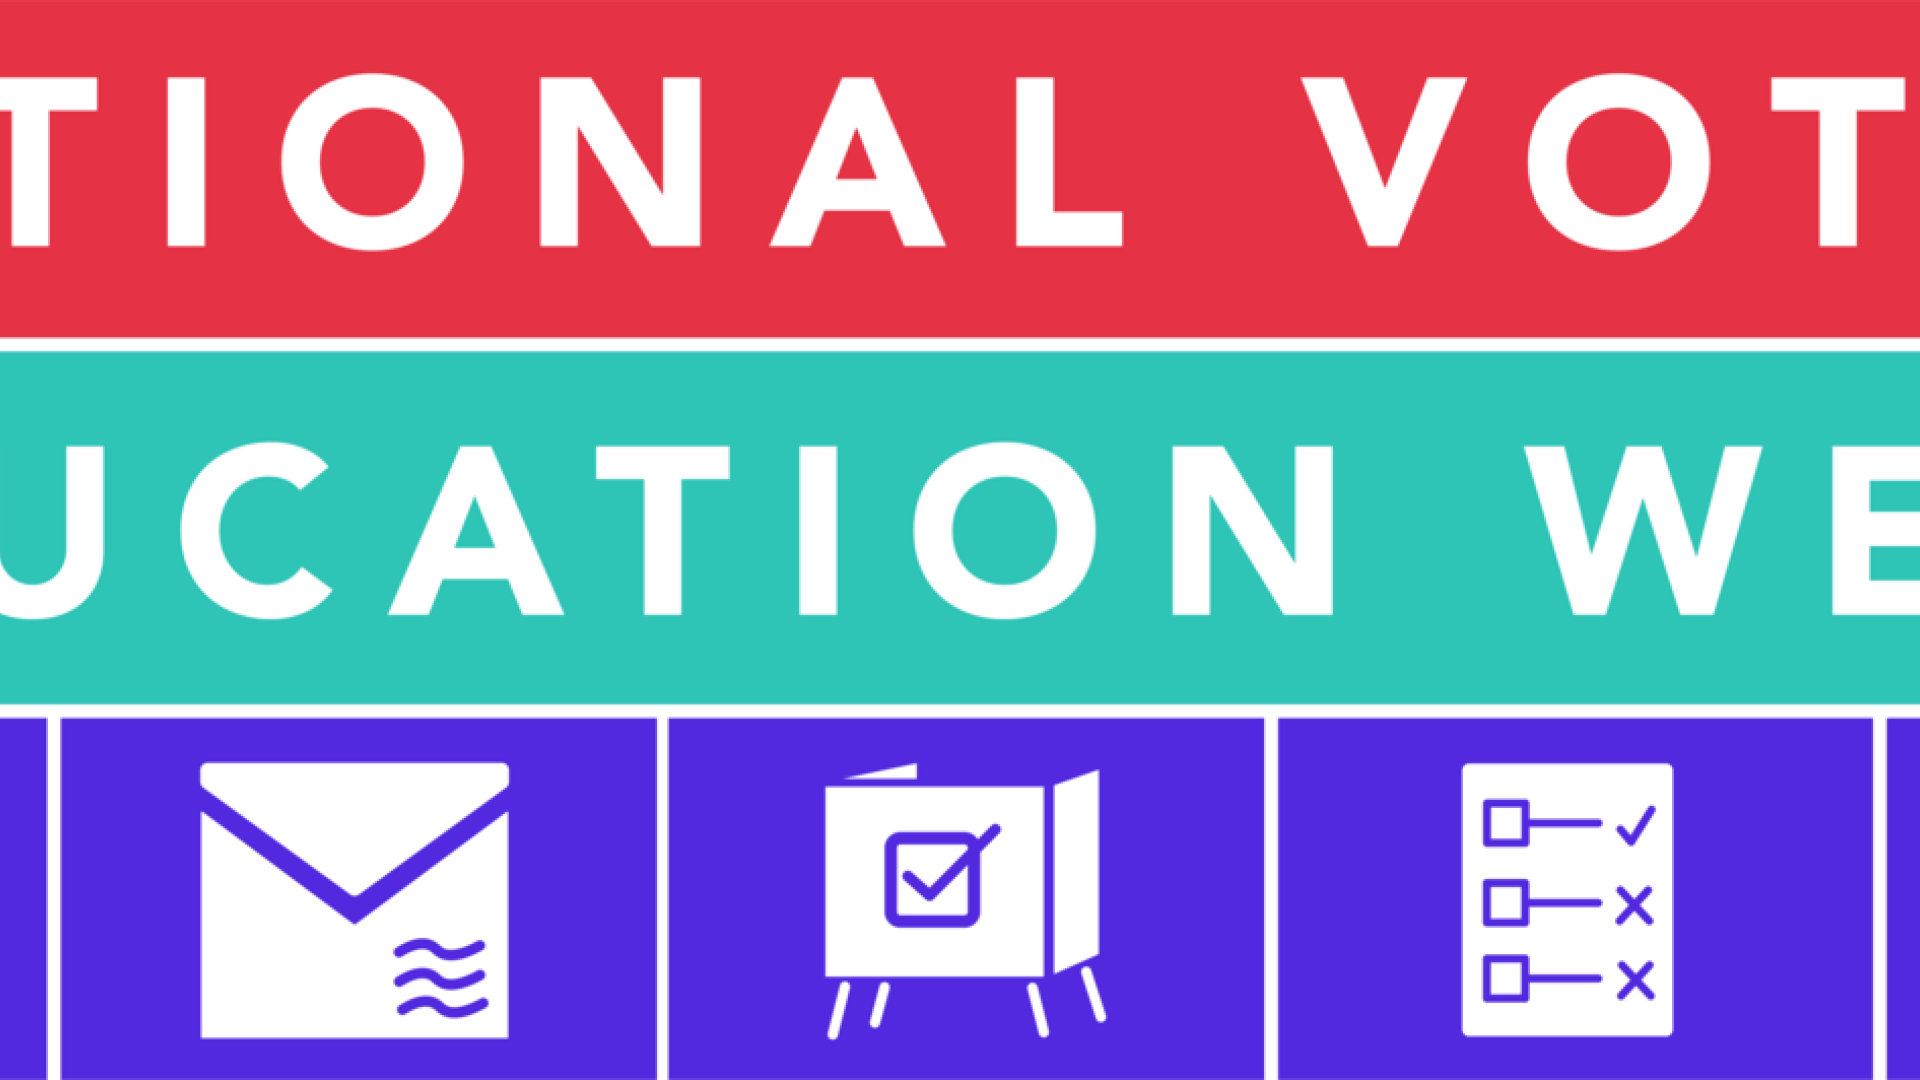 National Voter Education Week logo with five icons 